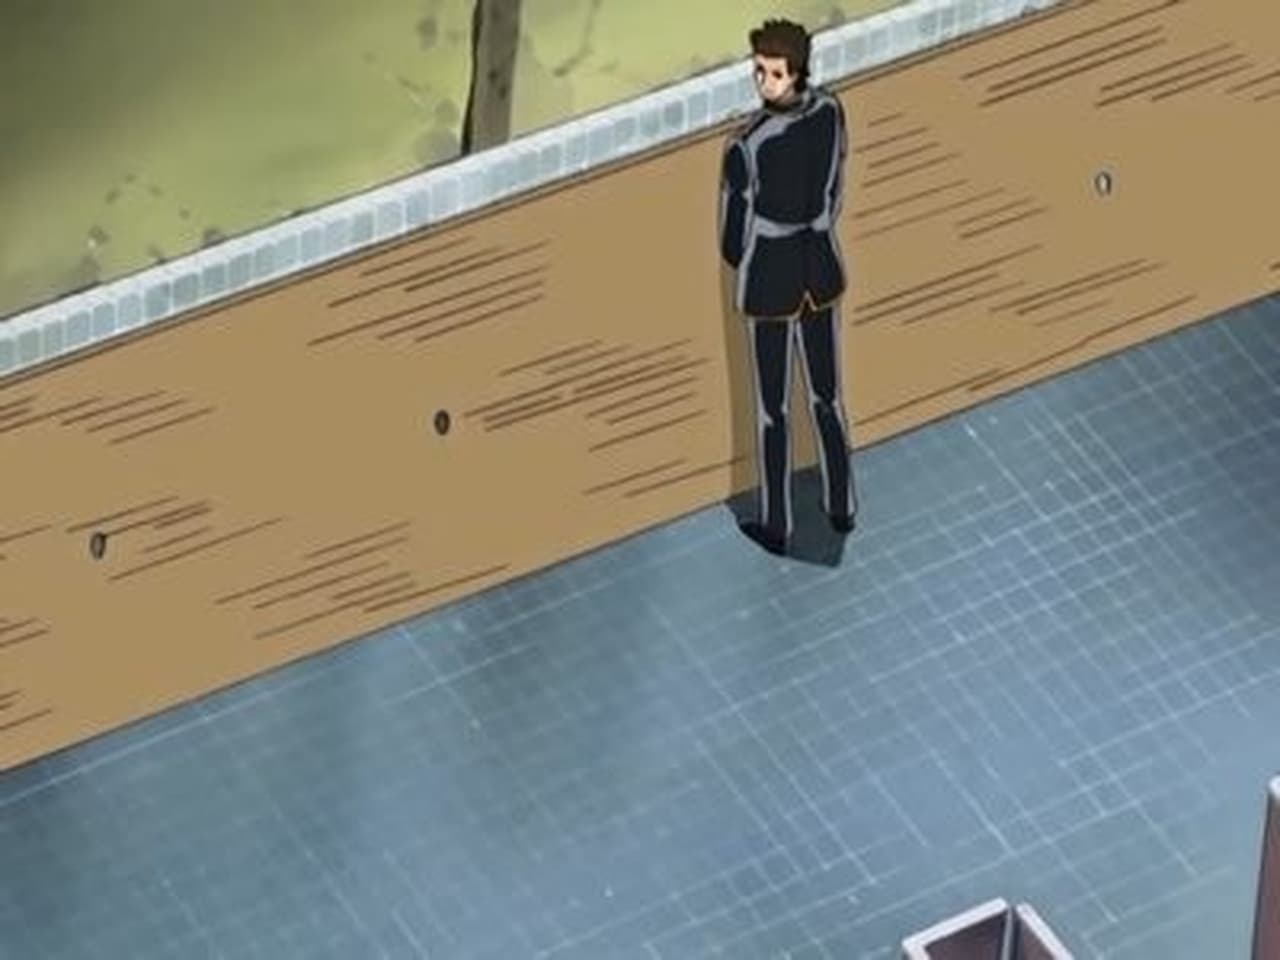 Gintama - Season 3 Episode 14 : Cleaning the Toilet Cleanses the Soul